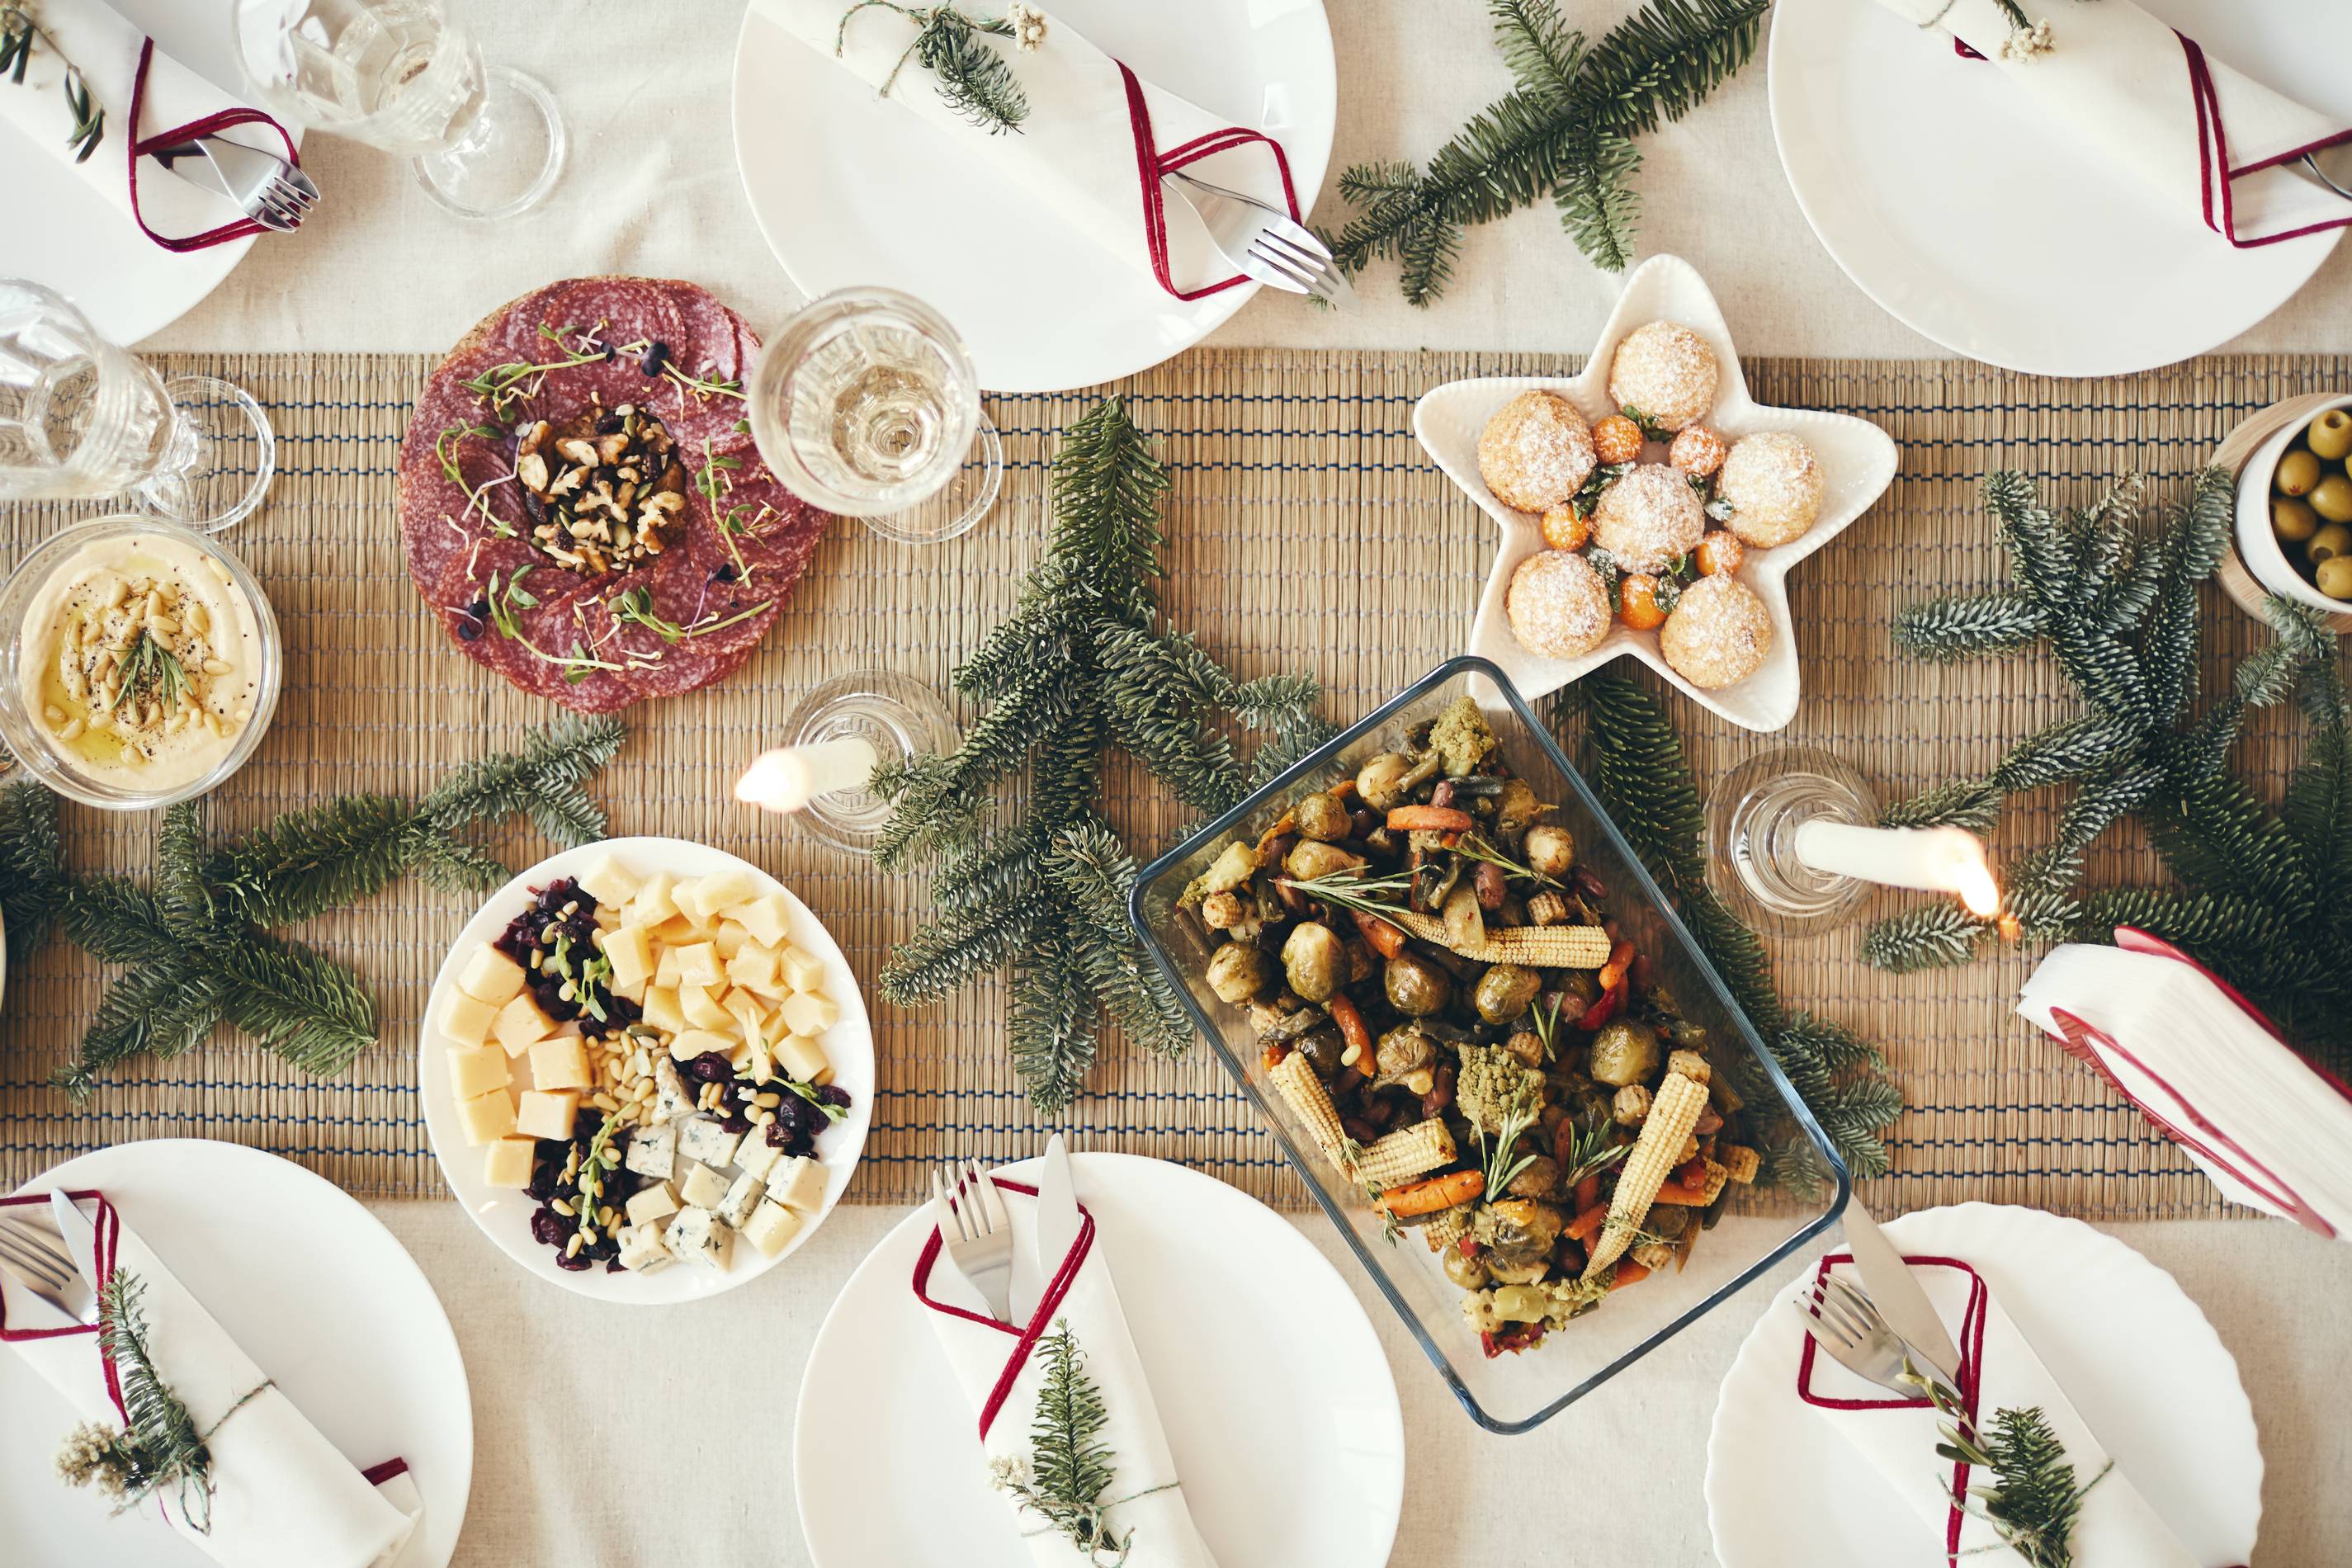 Where To Have Christmas Dinner In Atlanta